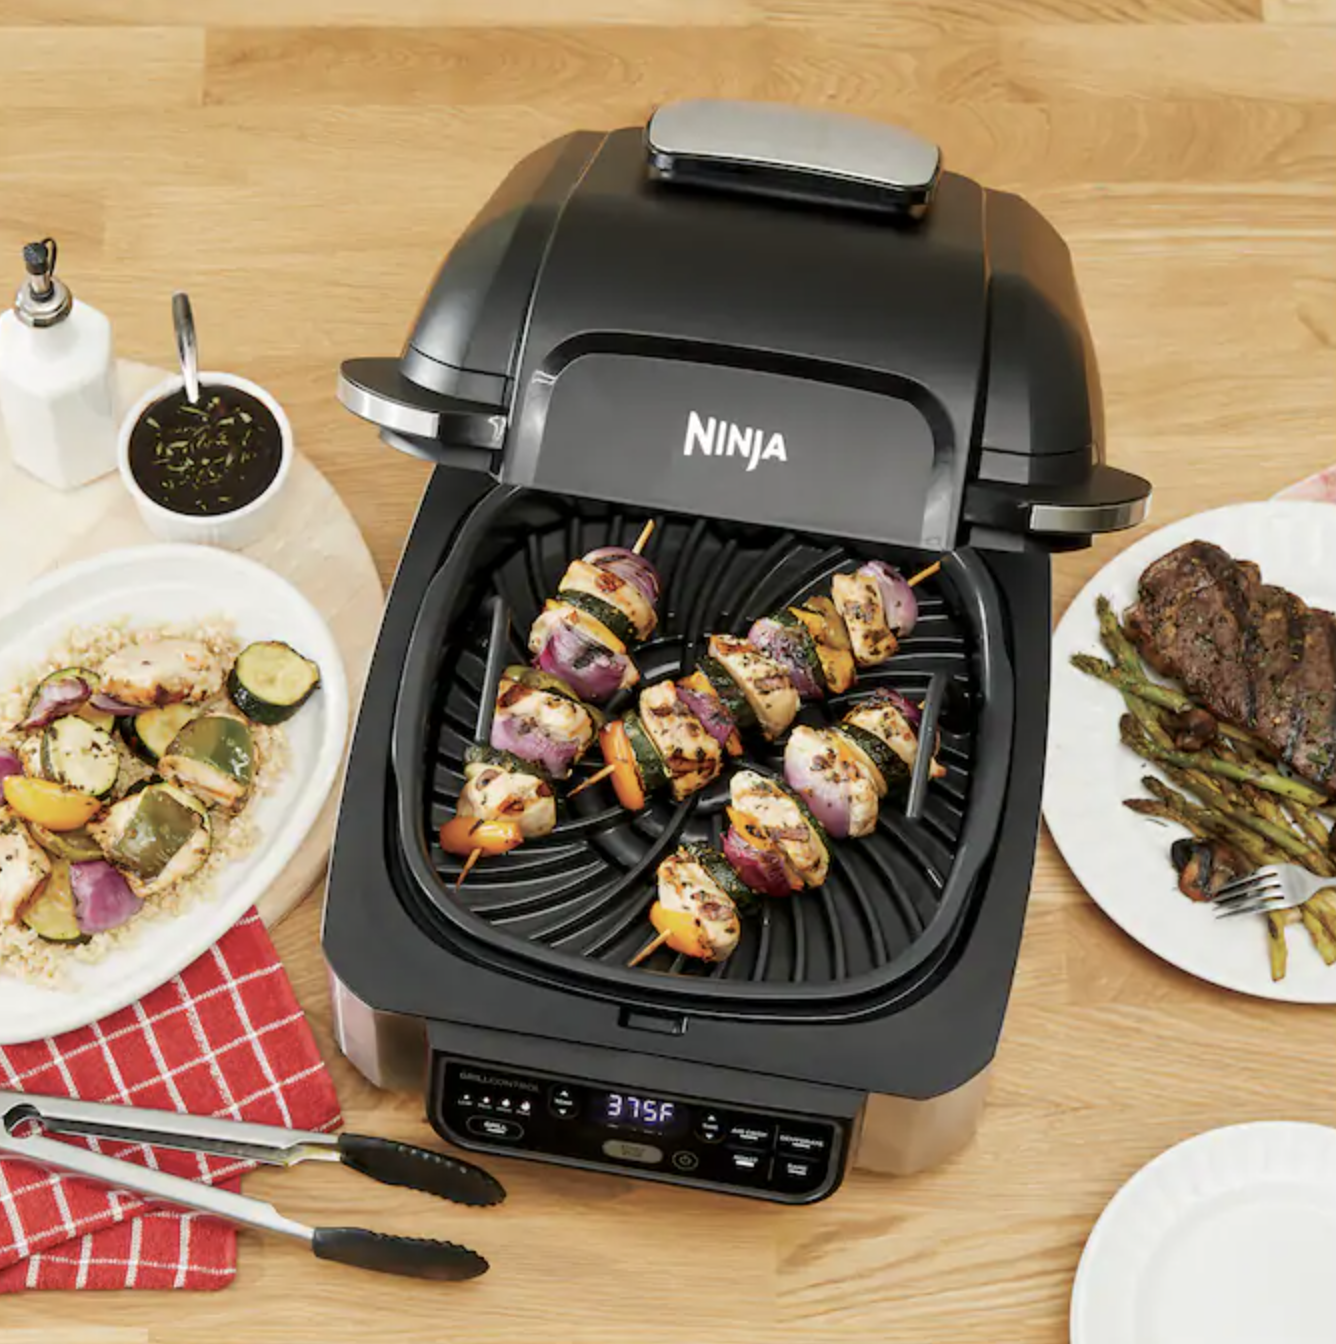 https://jz-eats.com/wp-content/uploads/2021/05/what-is-the-best-air-fryer-to-buy.png